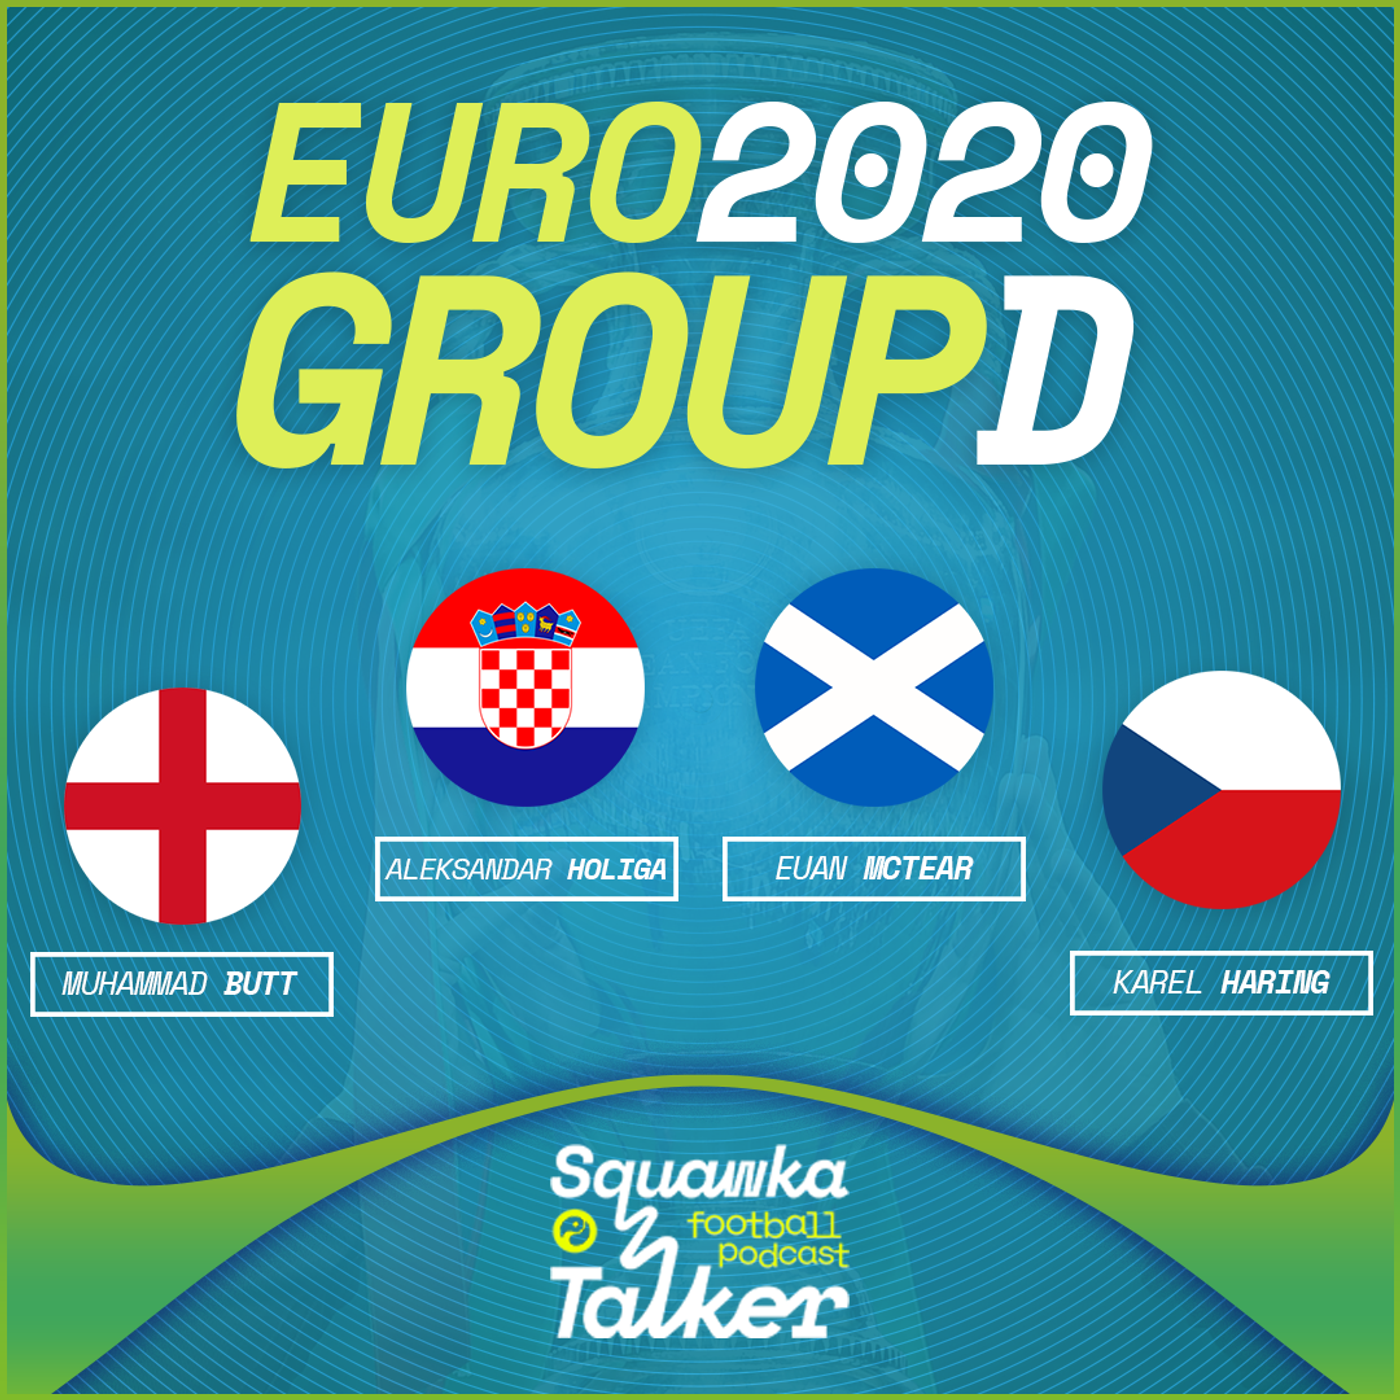 EURO 2020: Your complete guide to Group D